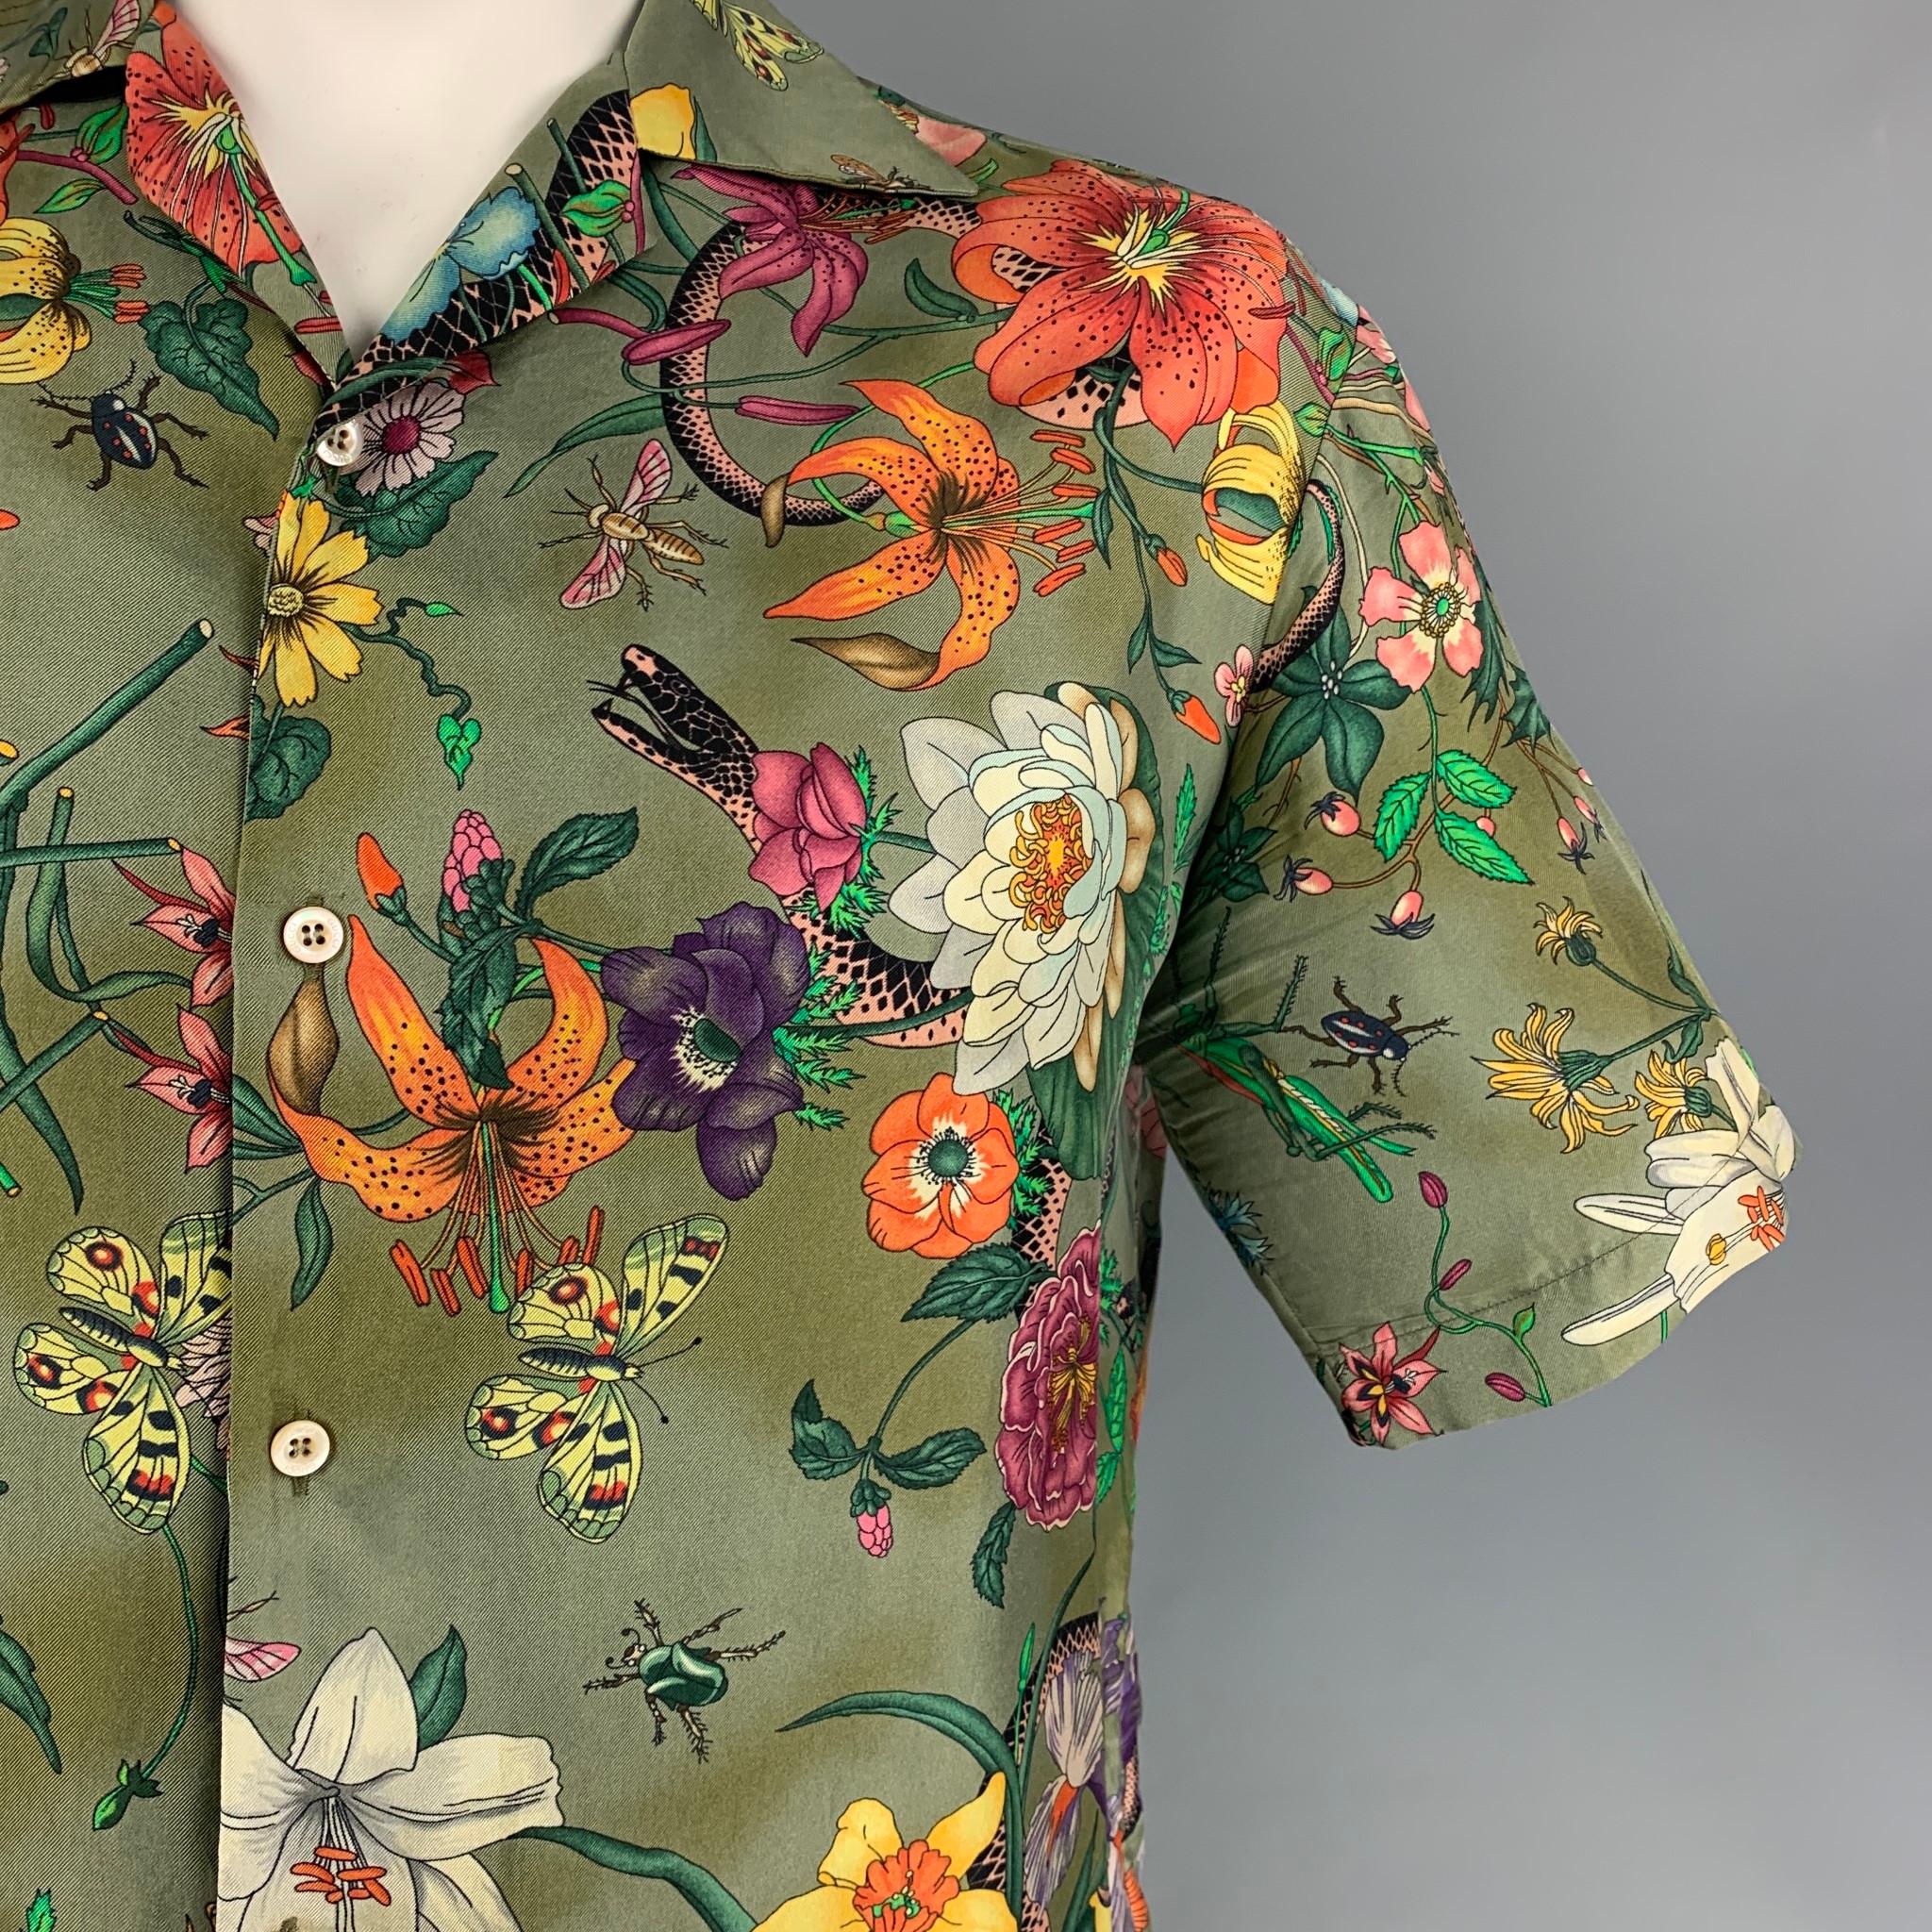 GUCCI short sleeve shirt comes in a multi-color floral print silk featuring a camp collar, loose fit, black trim, and a buttoned closure. Made in Italy. 

Very Good Pre-Owned Condition.
Marked: 52

Measurements:

Shoulder: 21 in.
Chest: 48